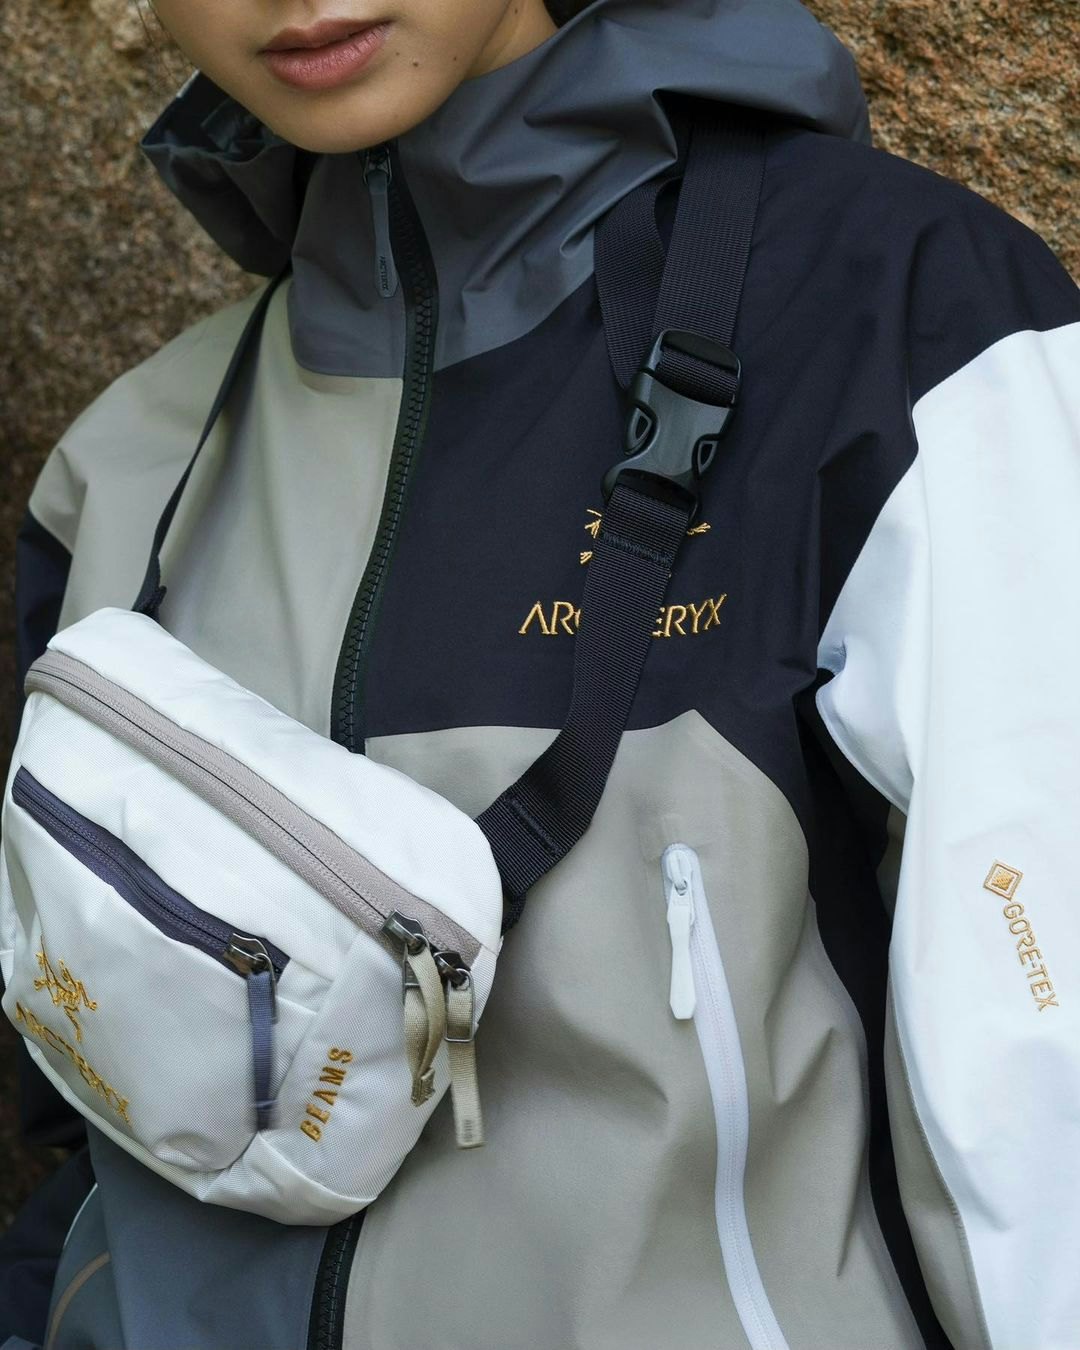 Beams and Arc'teryx's grail patchwork gear can soon be yours